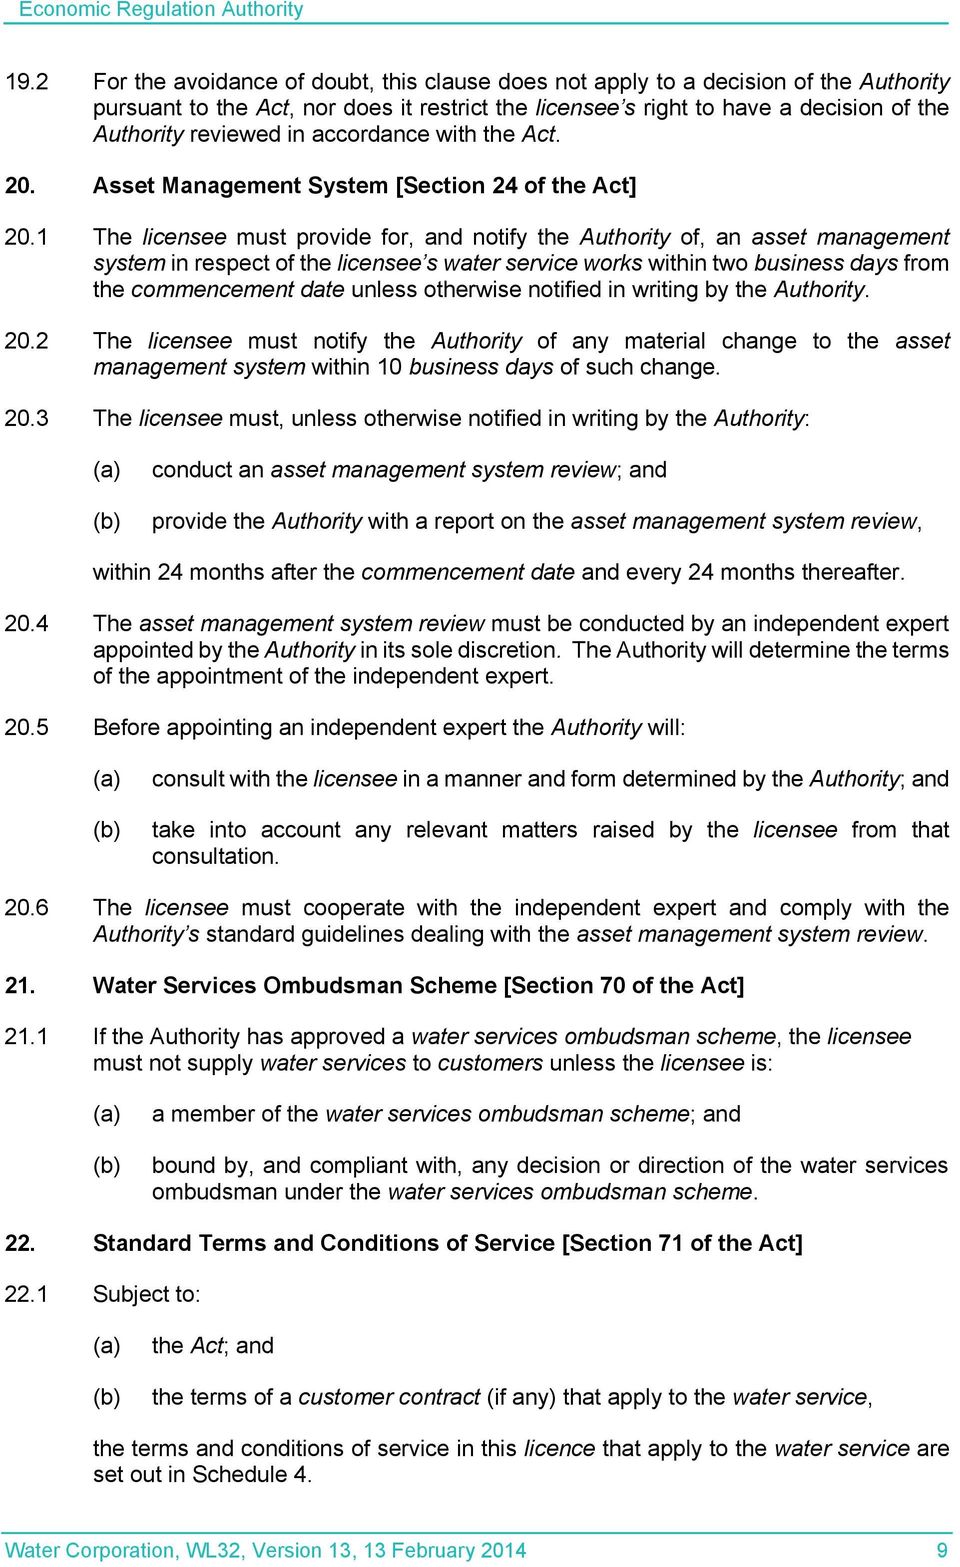 1 The licensee must provide for, and notify the Authority of, an asset management system in respect of the licensee s water service works within two business days from the commencement date unless